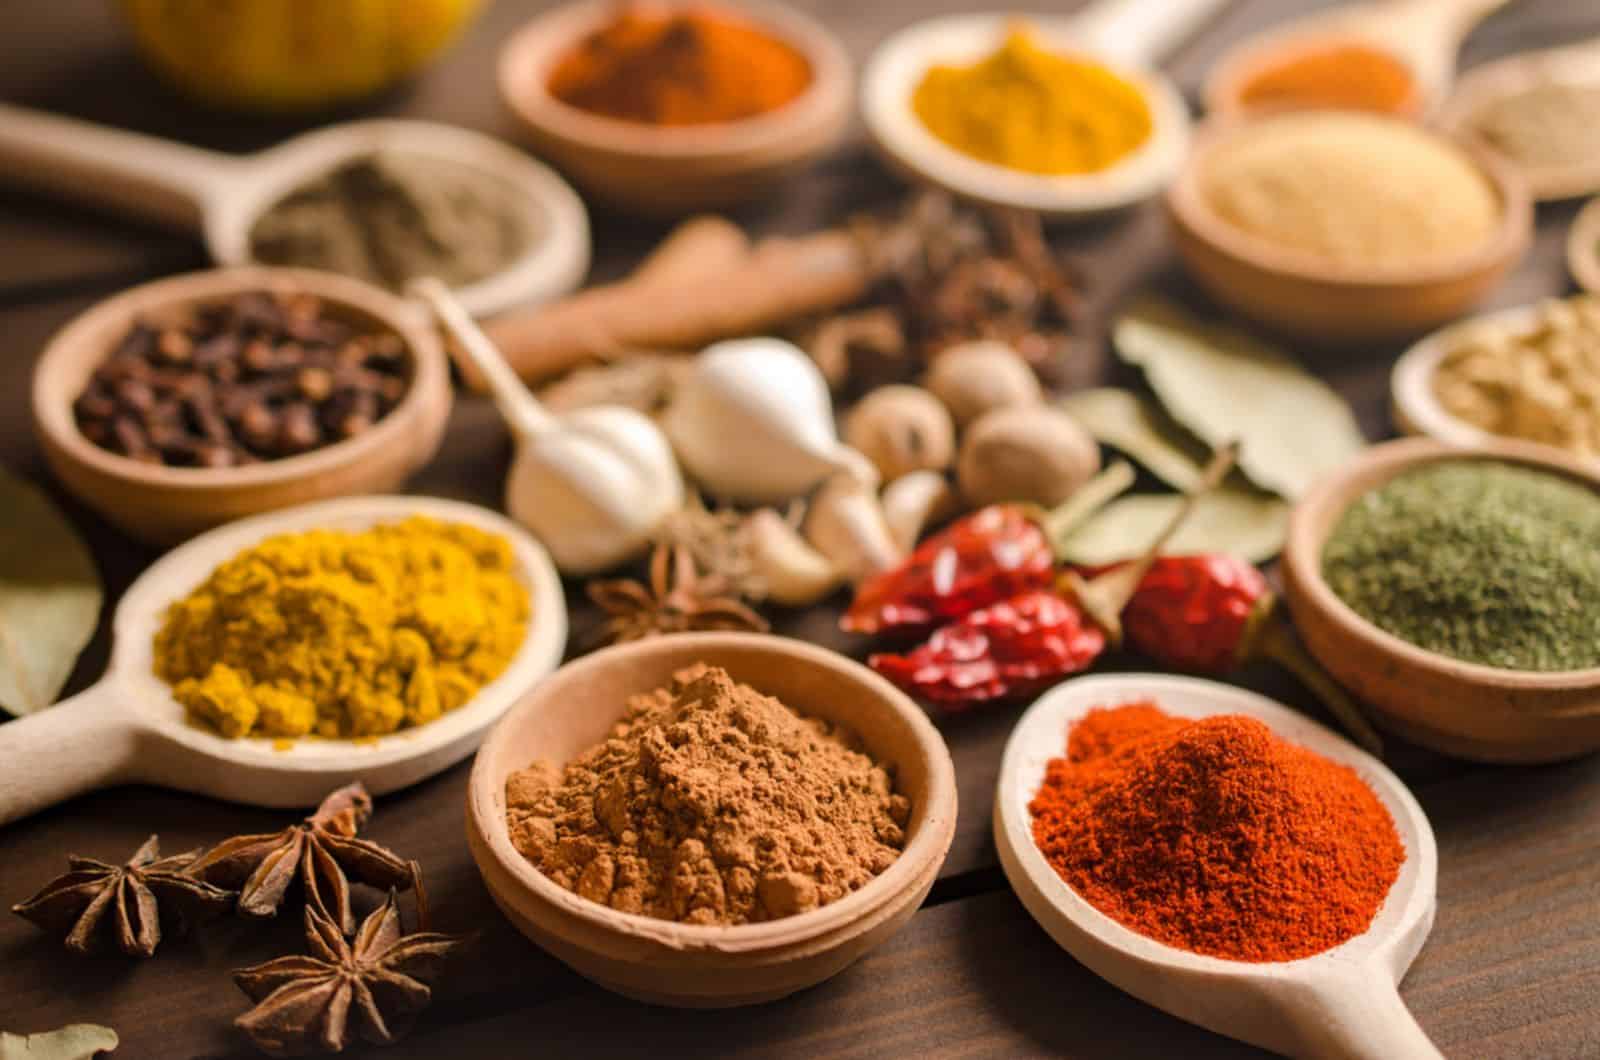 Indian spices and dried herbs on wooden table